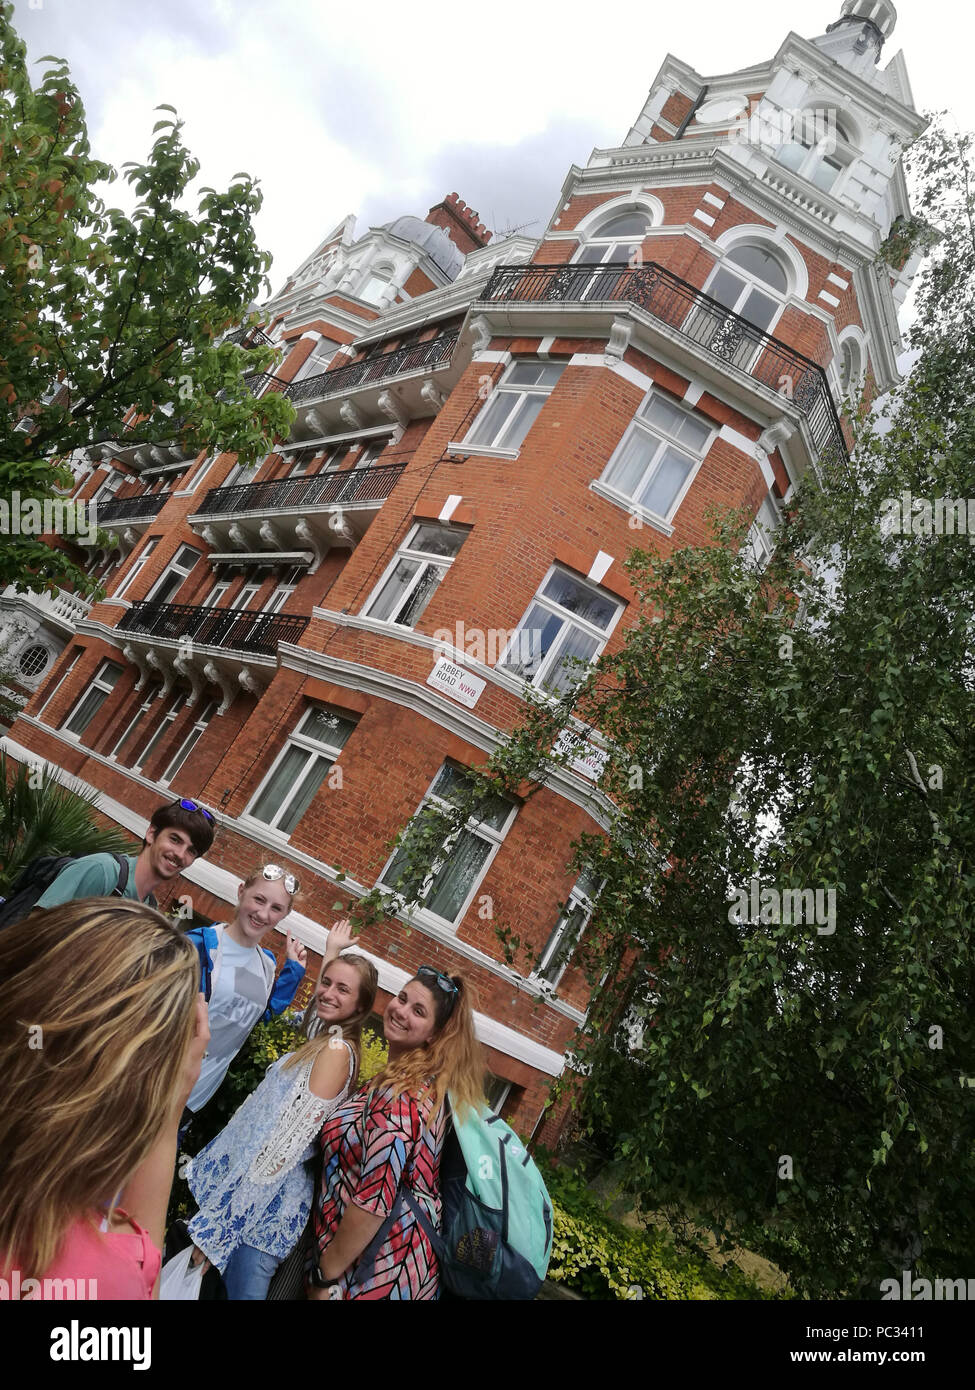 Tourists pose for photos on Abbey Road, opposite the famous studios, July 2018. The sign can be seen on the building behind. Stock Photo